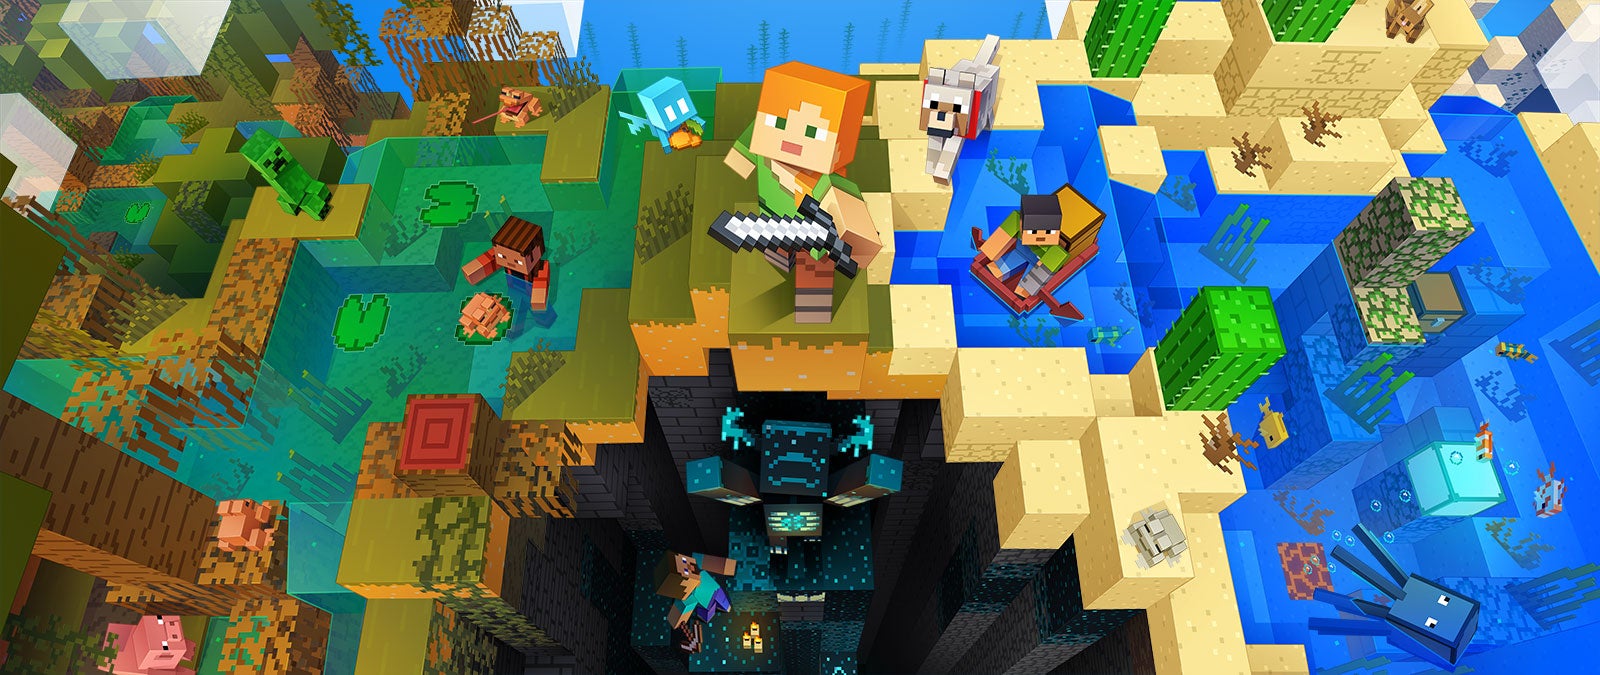 Image for Minecraft rejects NFTs and blockchain to ensure "a safe and inclusive experience"